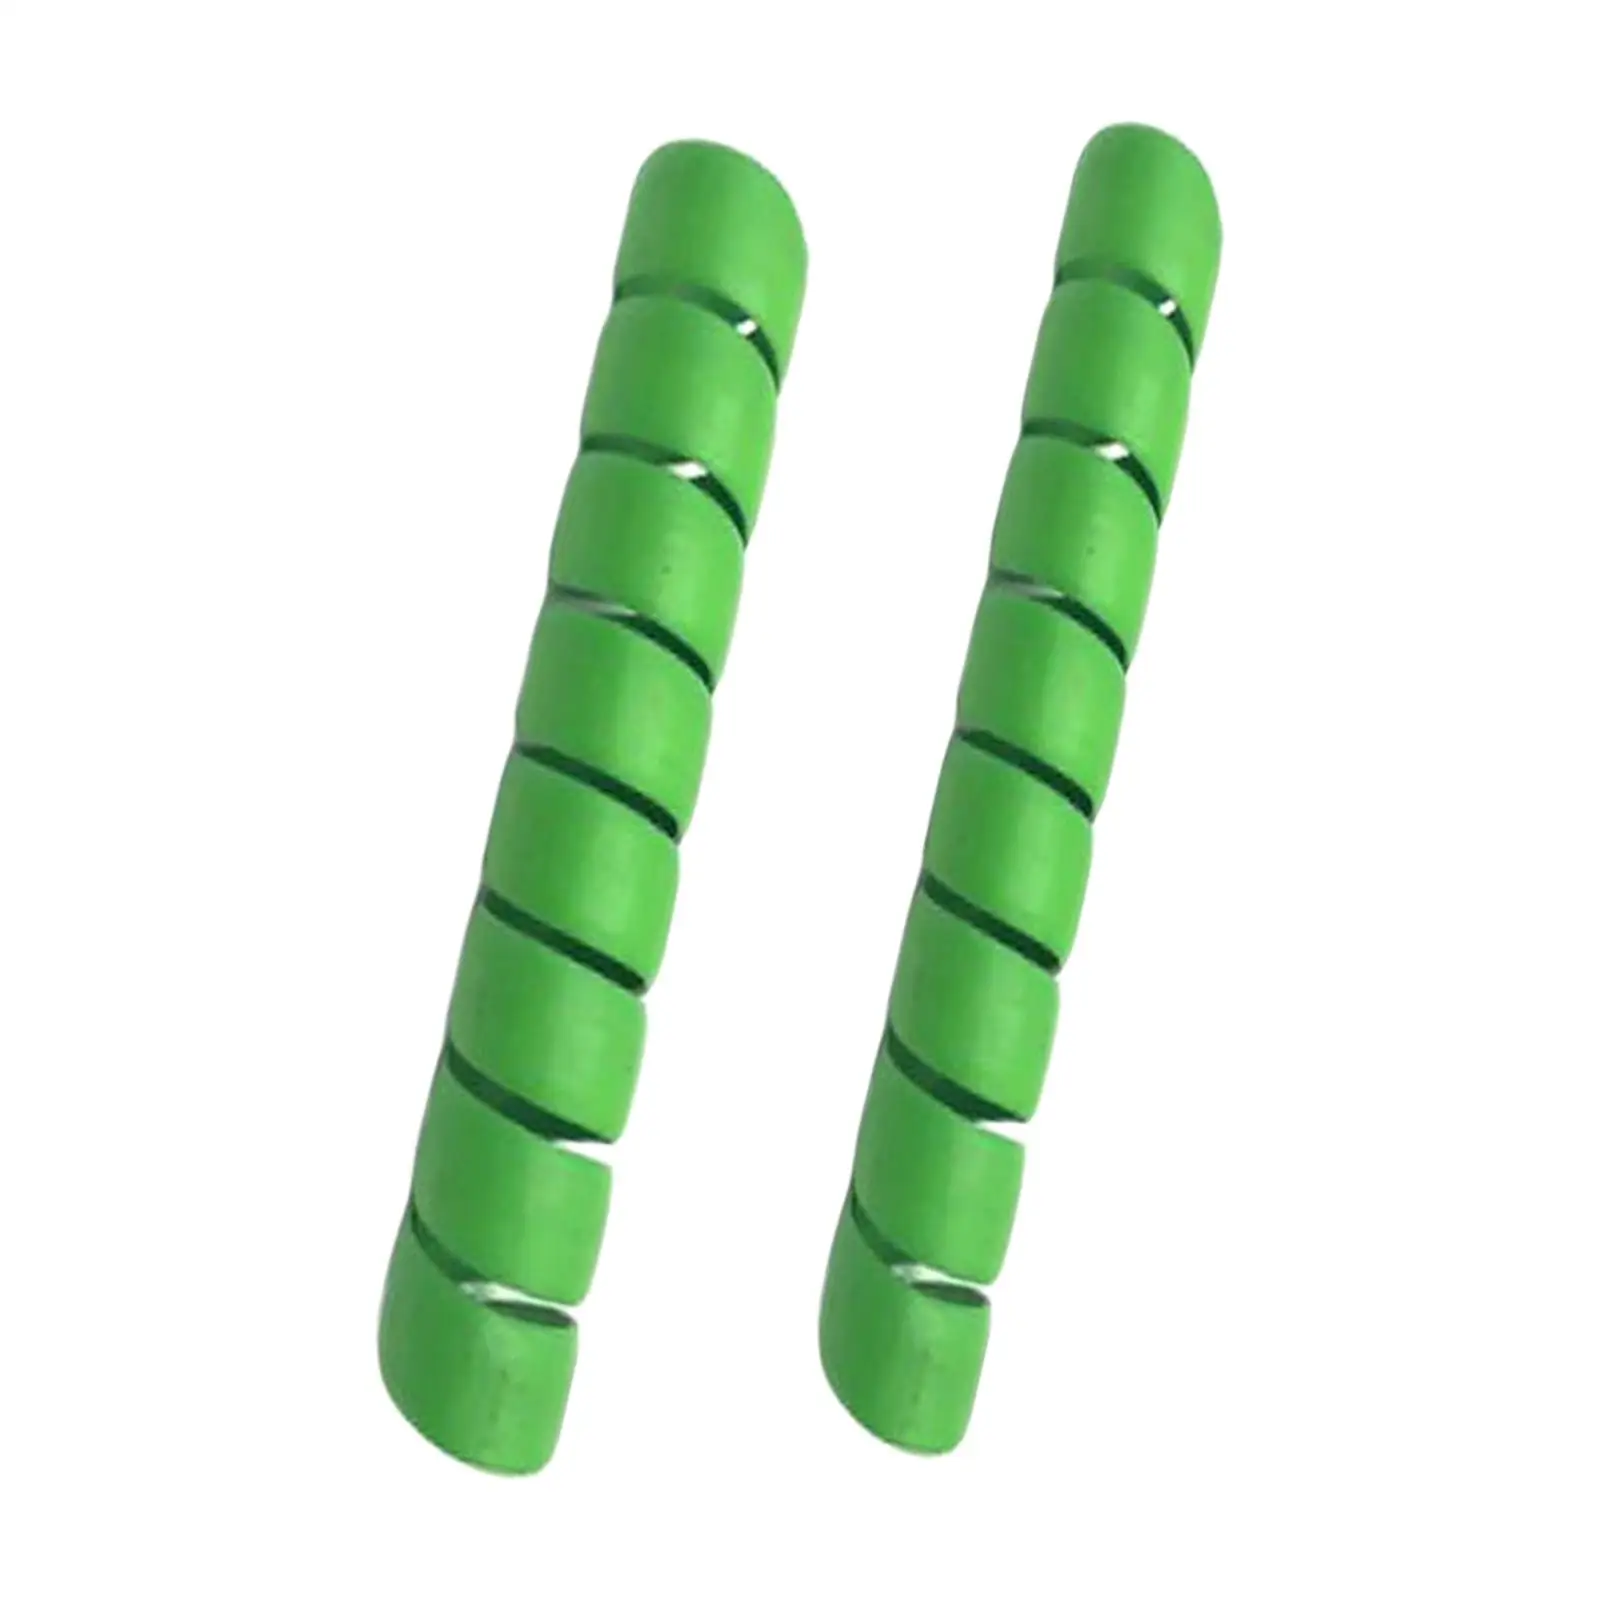 2Pcs Tree Trunk Protector Weather Resistant Portable Prevent Damage Tree Protection Spiral Tree Guard Protect Saplings Plants